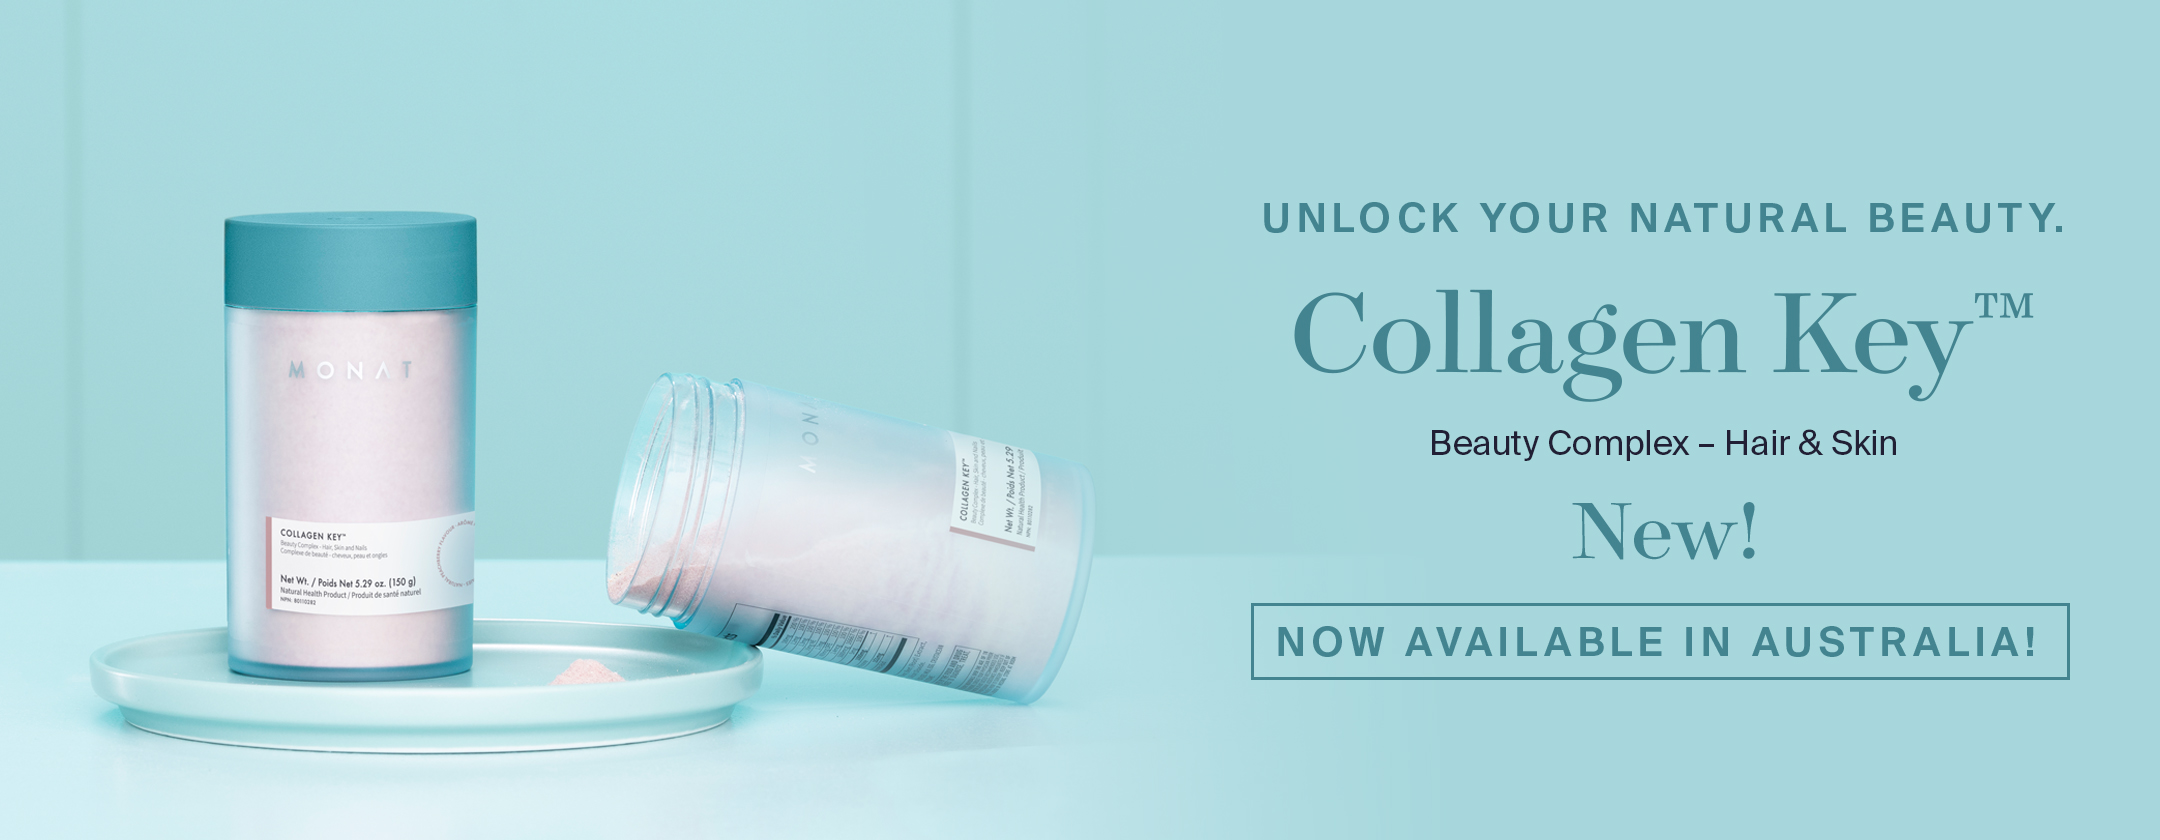 Au wellness collagen now available vibe banner